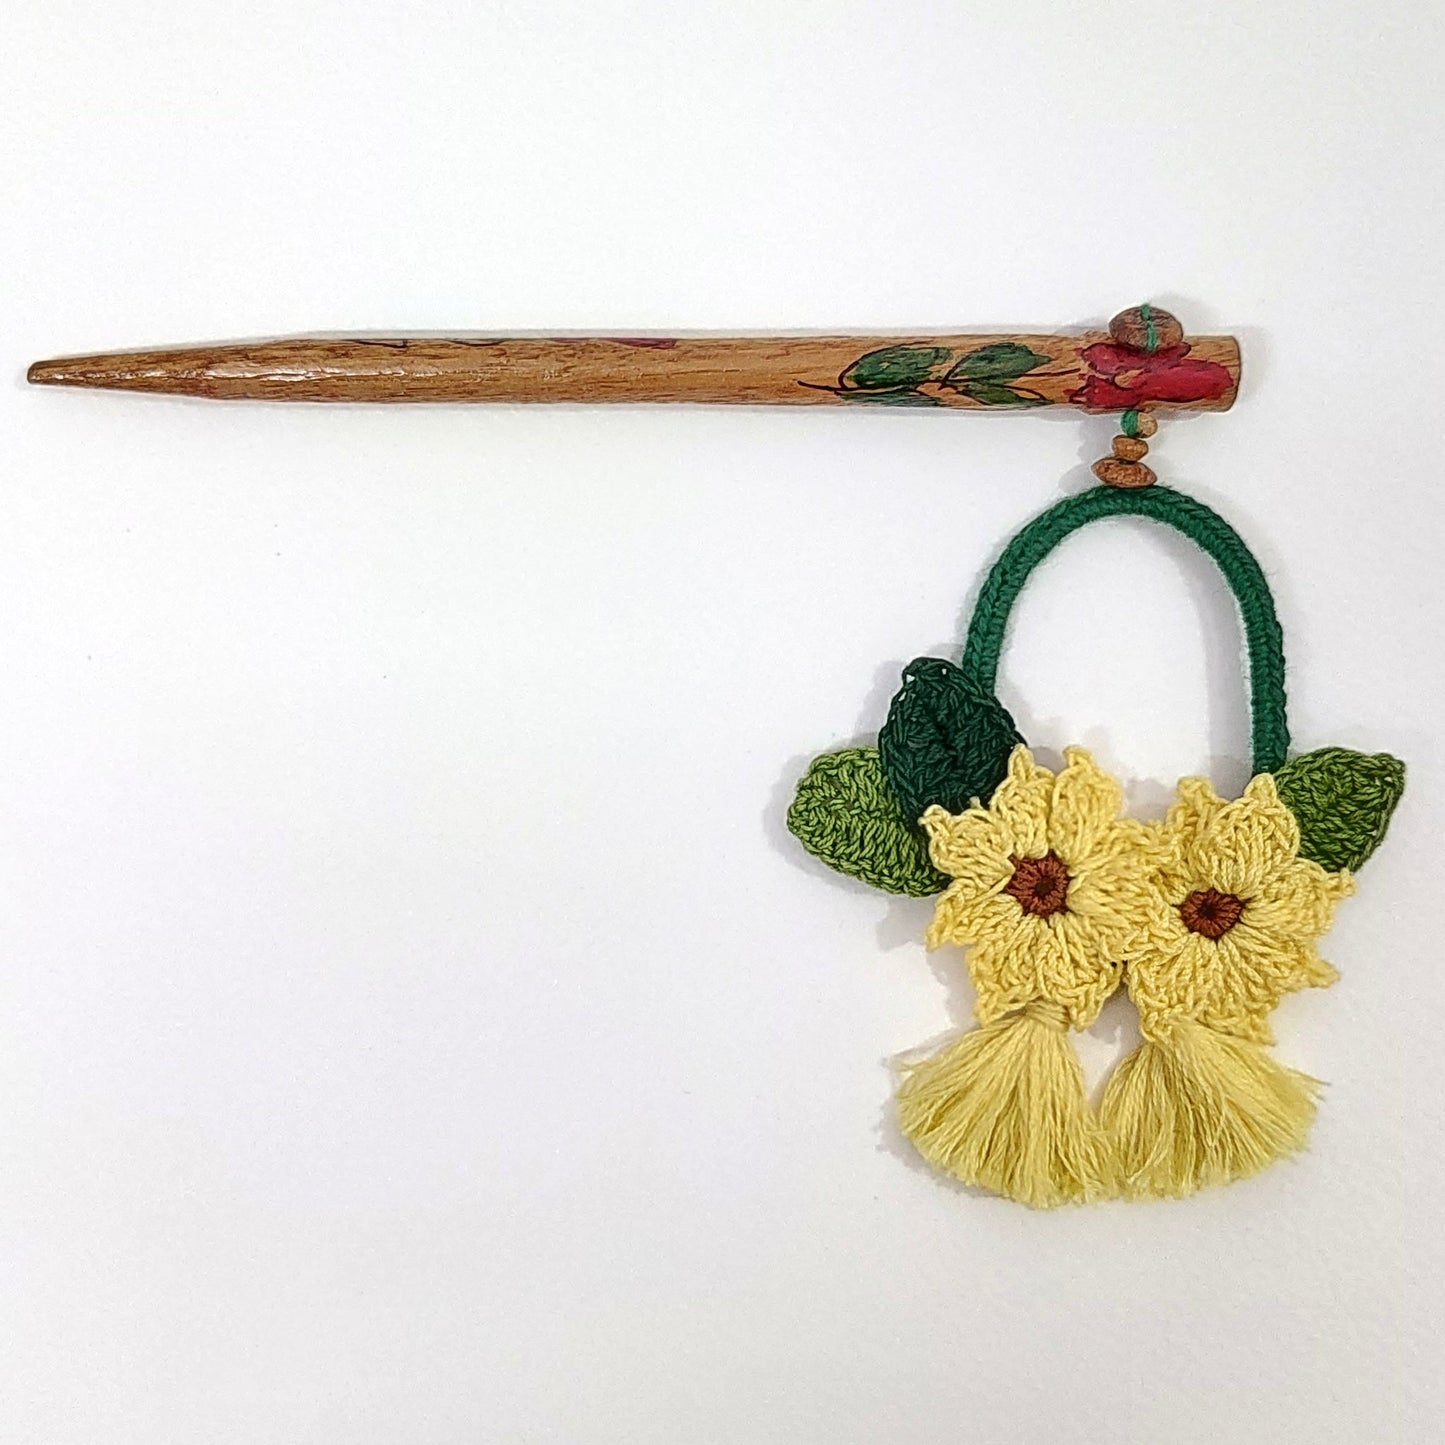 Wooden Hair Stick Sunflower Yellow And Green at Kamakhyaa by Ikriit'm. This item is Accessories, Cotton Yarn, Green, Hair Accessory, Ikriit'm, Wood, Yellow